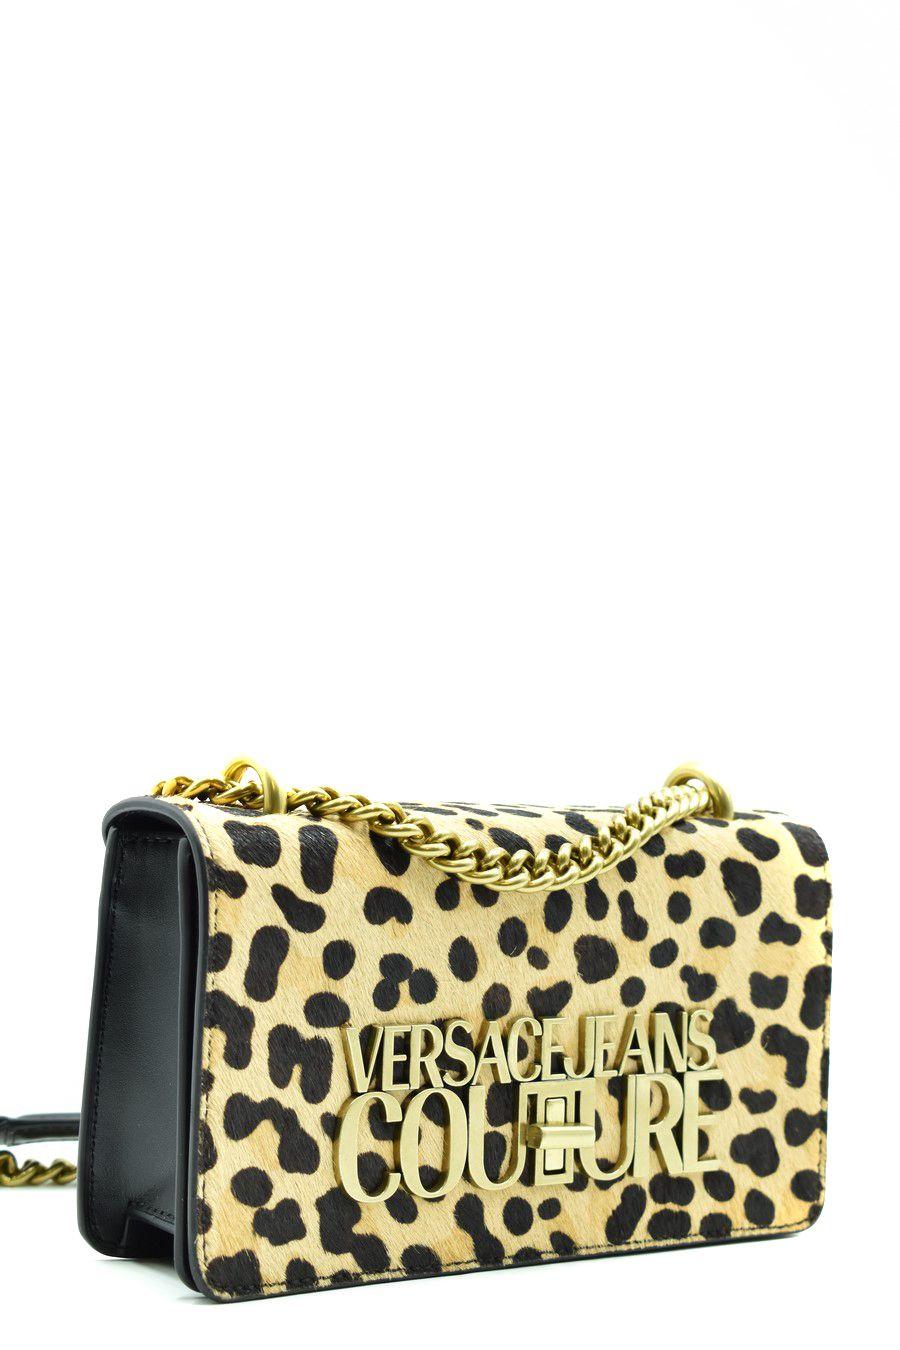 Versace Jeans Couture Shoulder Bags in Metallic | Lyst